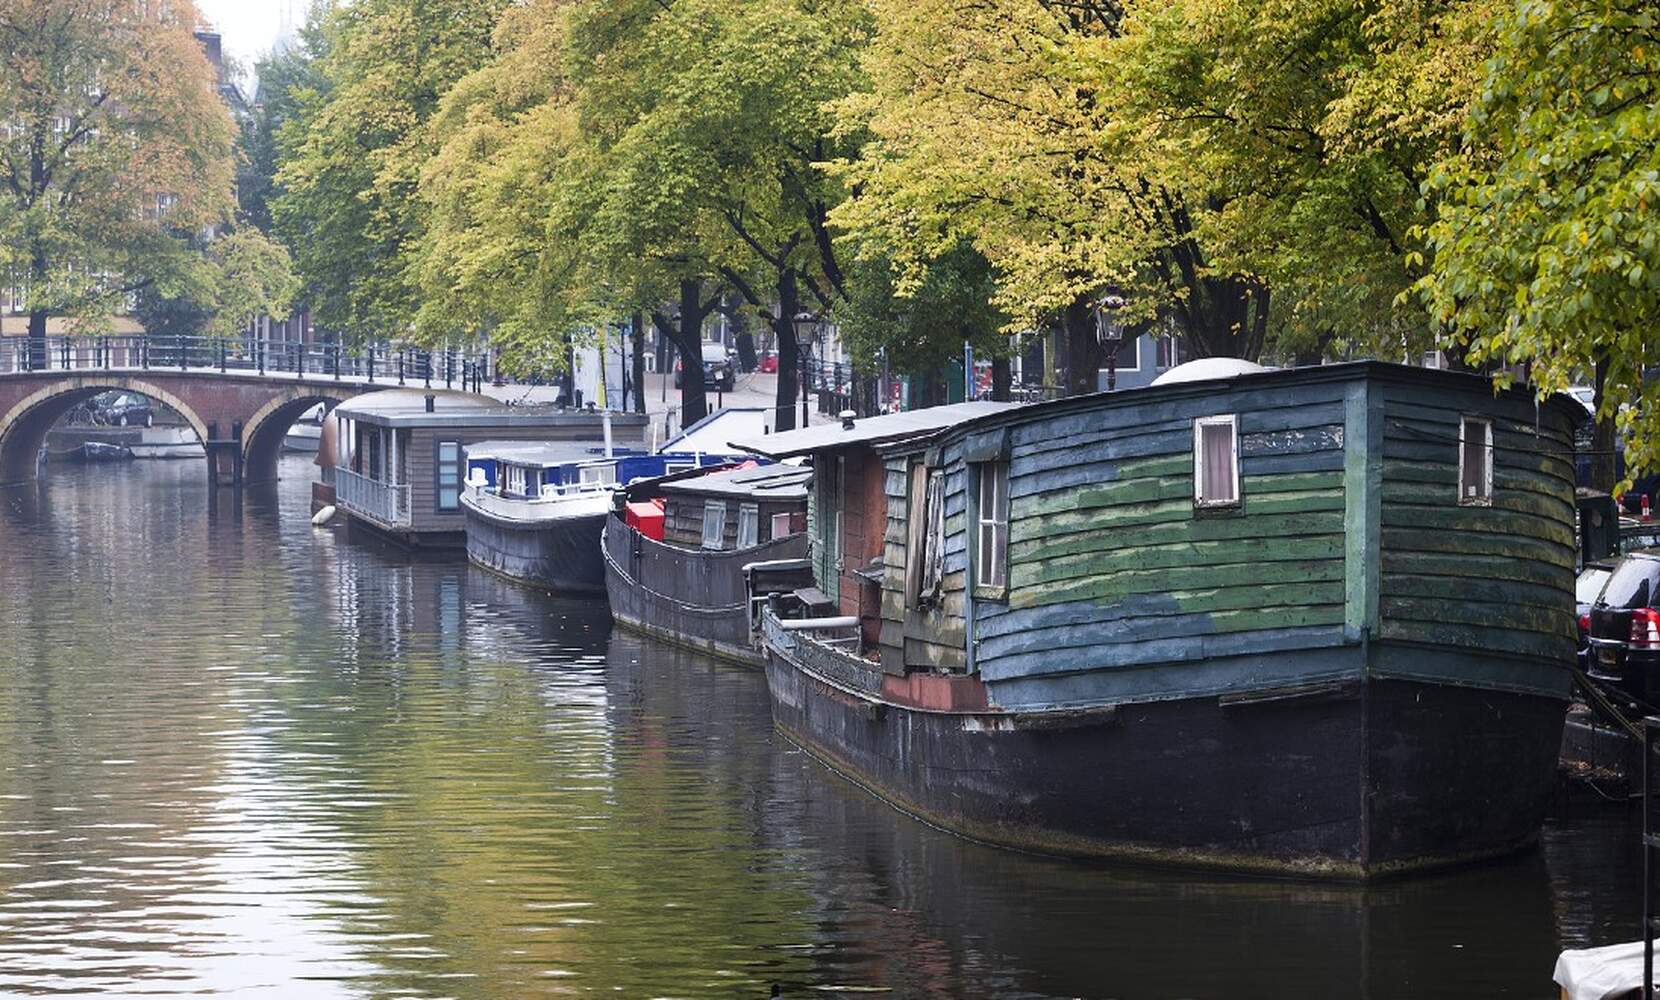 Dogger, “Amsterdam's oldest houseboat” with a history of 134 years, was removed from the Prinsengracht Canal.